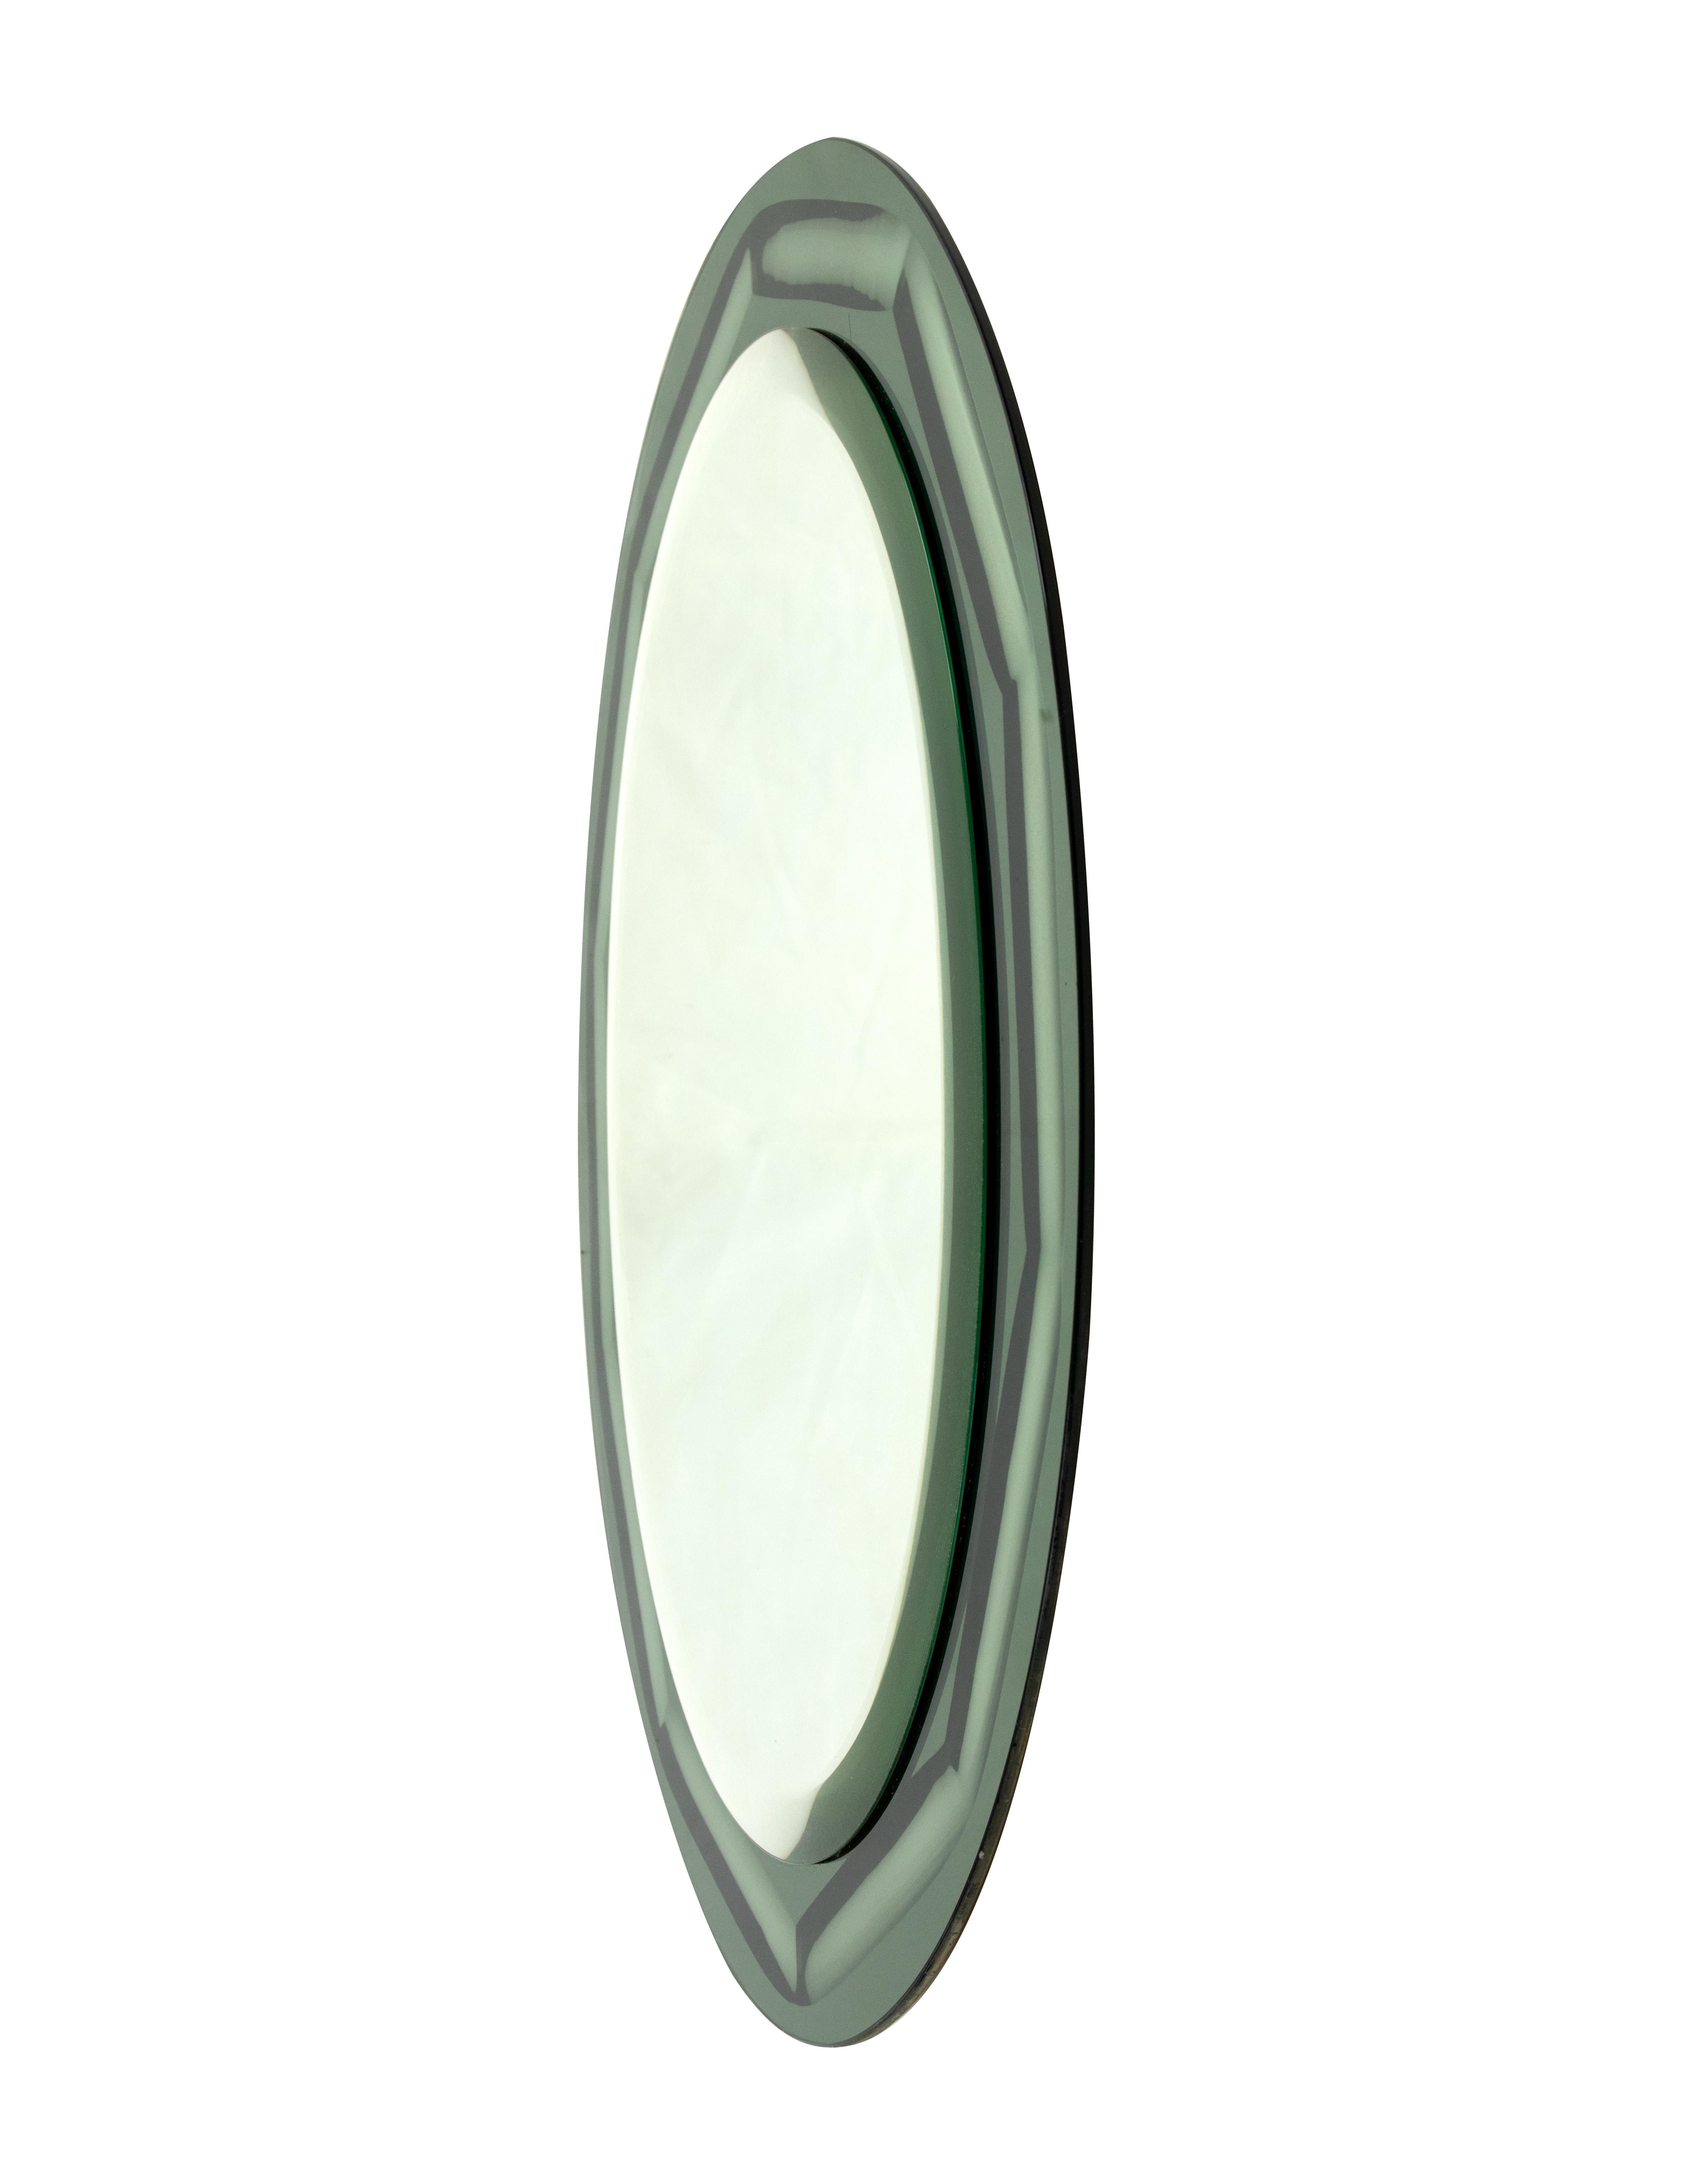 Italian Vintage Oval Mirror by Lupi Cristal-Luxor, Italy 1970s